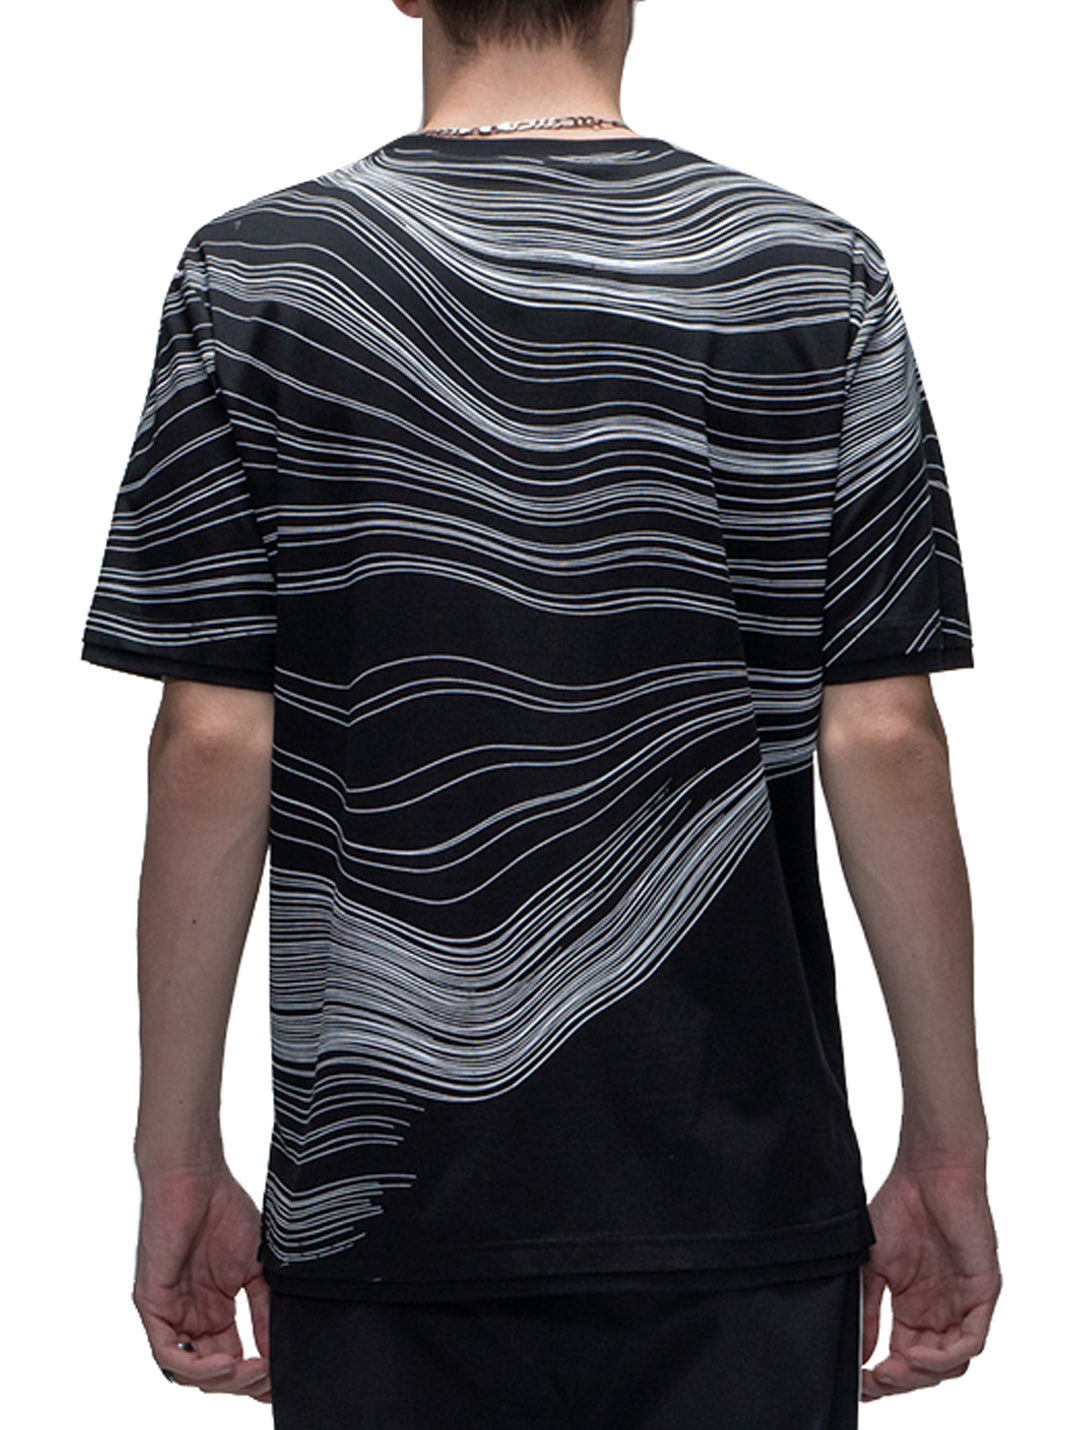 Harrison Wong-Tee With Contour Lines Print T-shirt Harrison Wong 